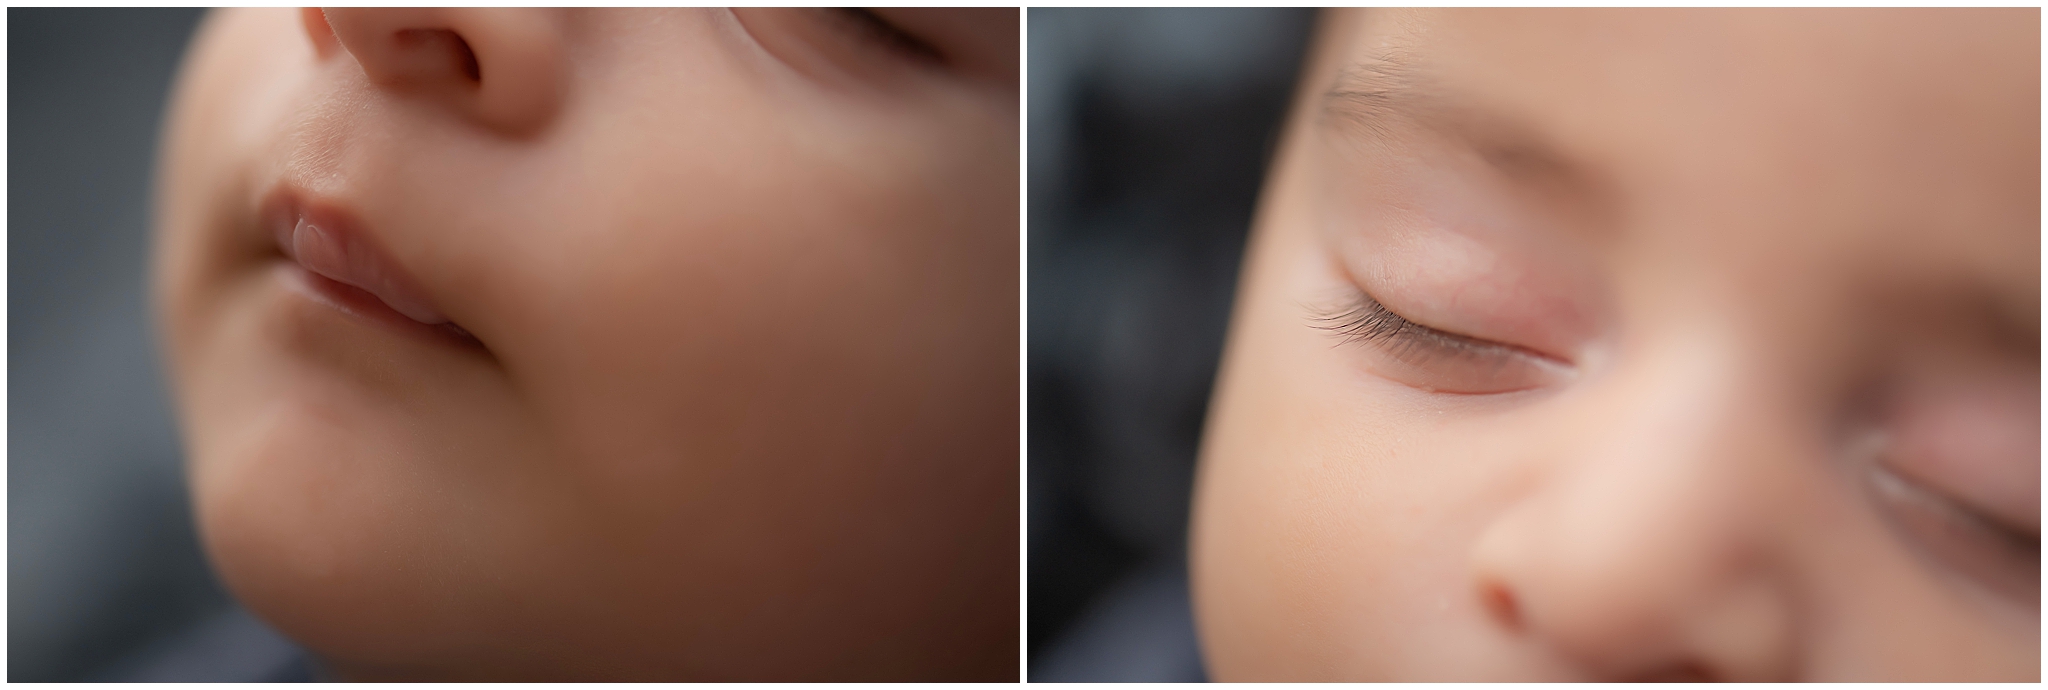 close-up images of newborn baby taken during newborn photography session in london ontario